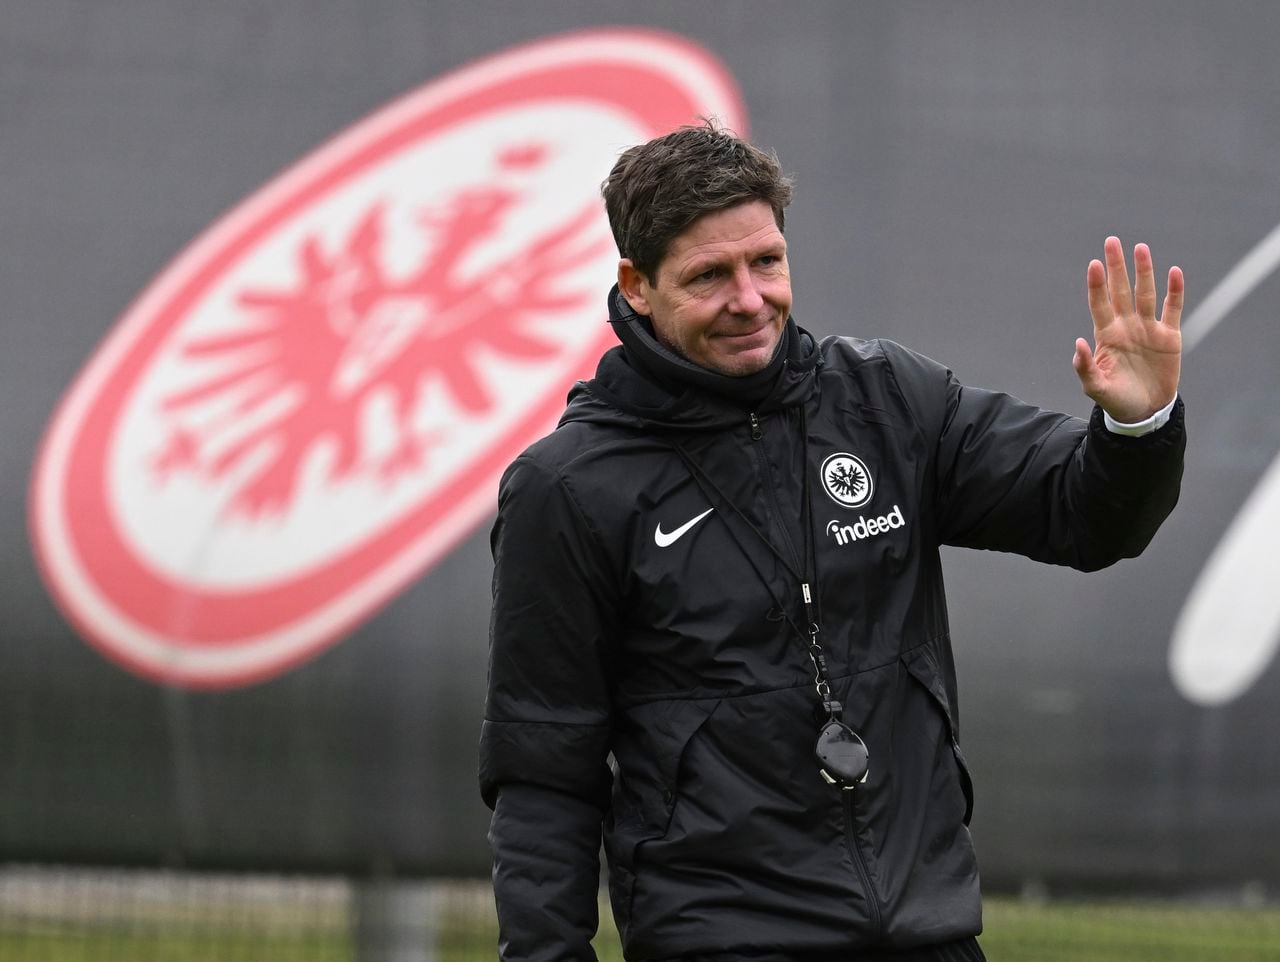 Eintracht Frankfurt's head coach Oliver Glasner waves during a training session in Frankfurt, Germany, Tueady, March 14, 2023. Frankfurt will face Italian team SSC Napoli for a Champions League round of 16 second leg soccer match in Napoli on Wednesday, March 15, 2023. (Arne Dedert/dpa via AP)